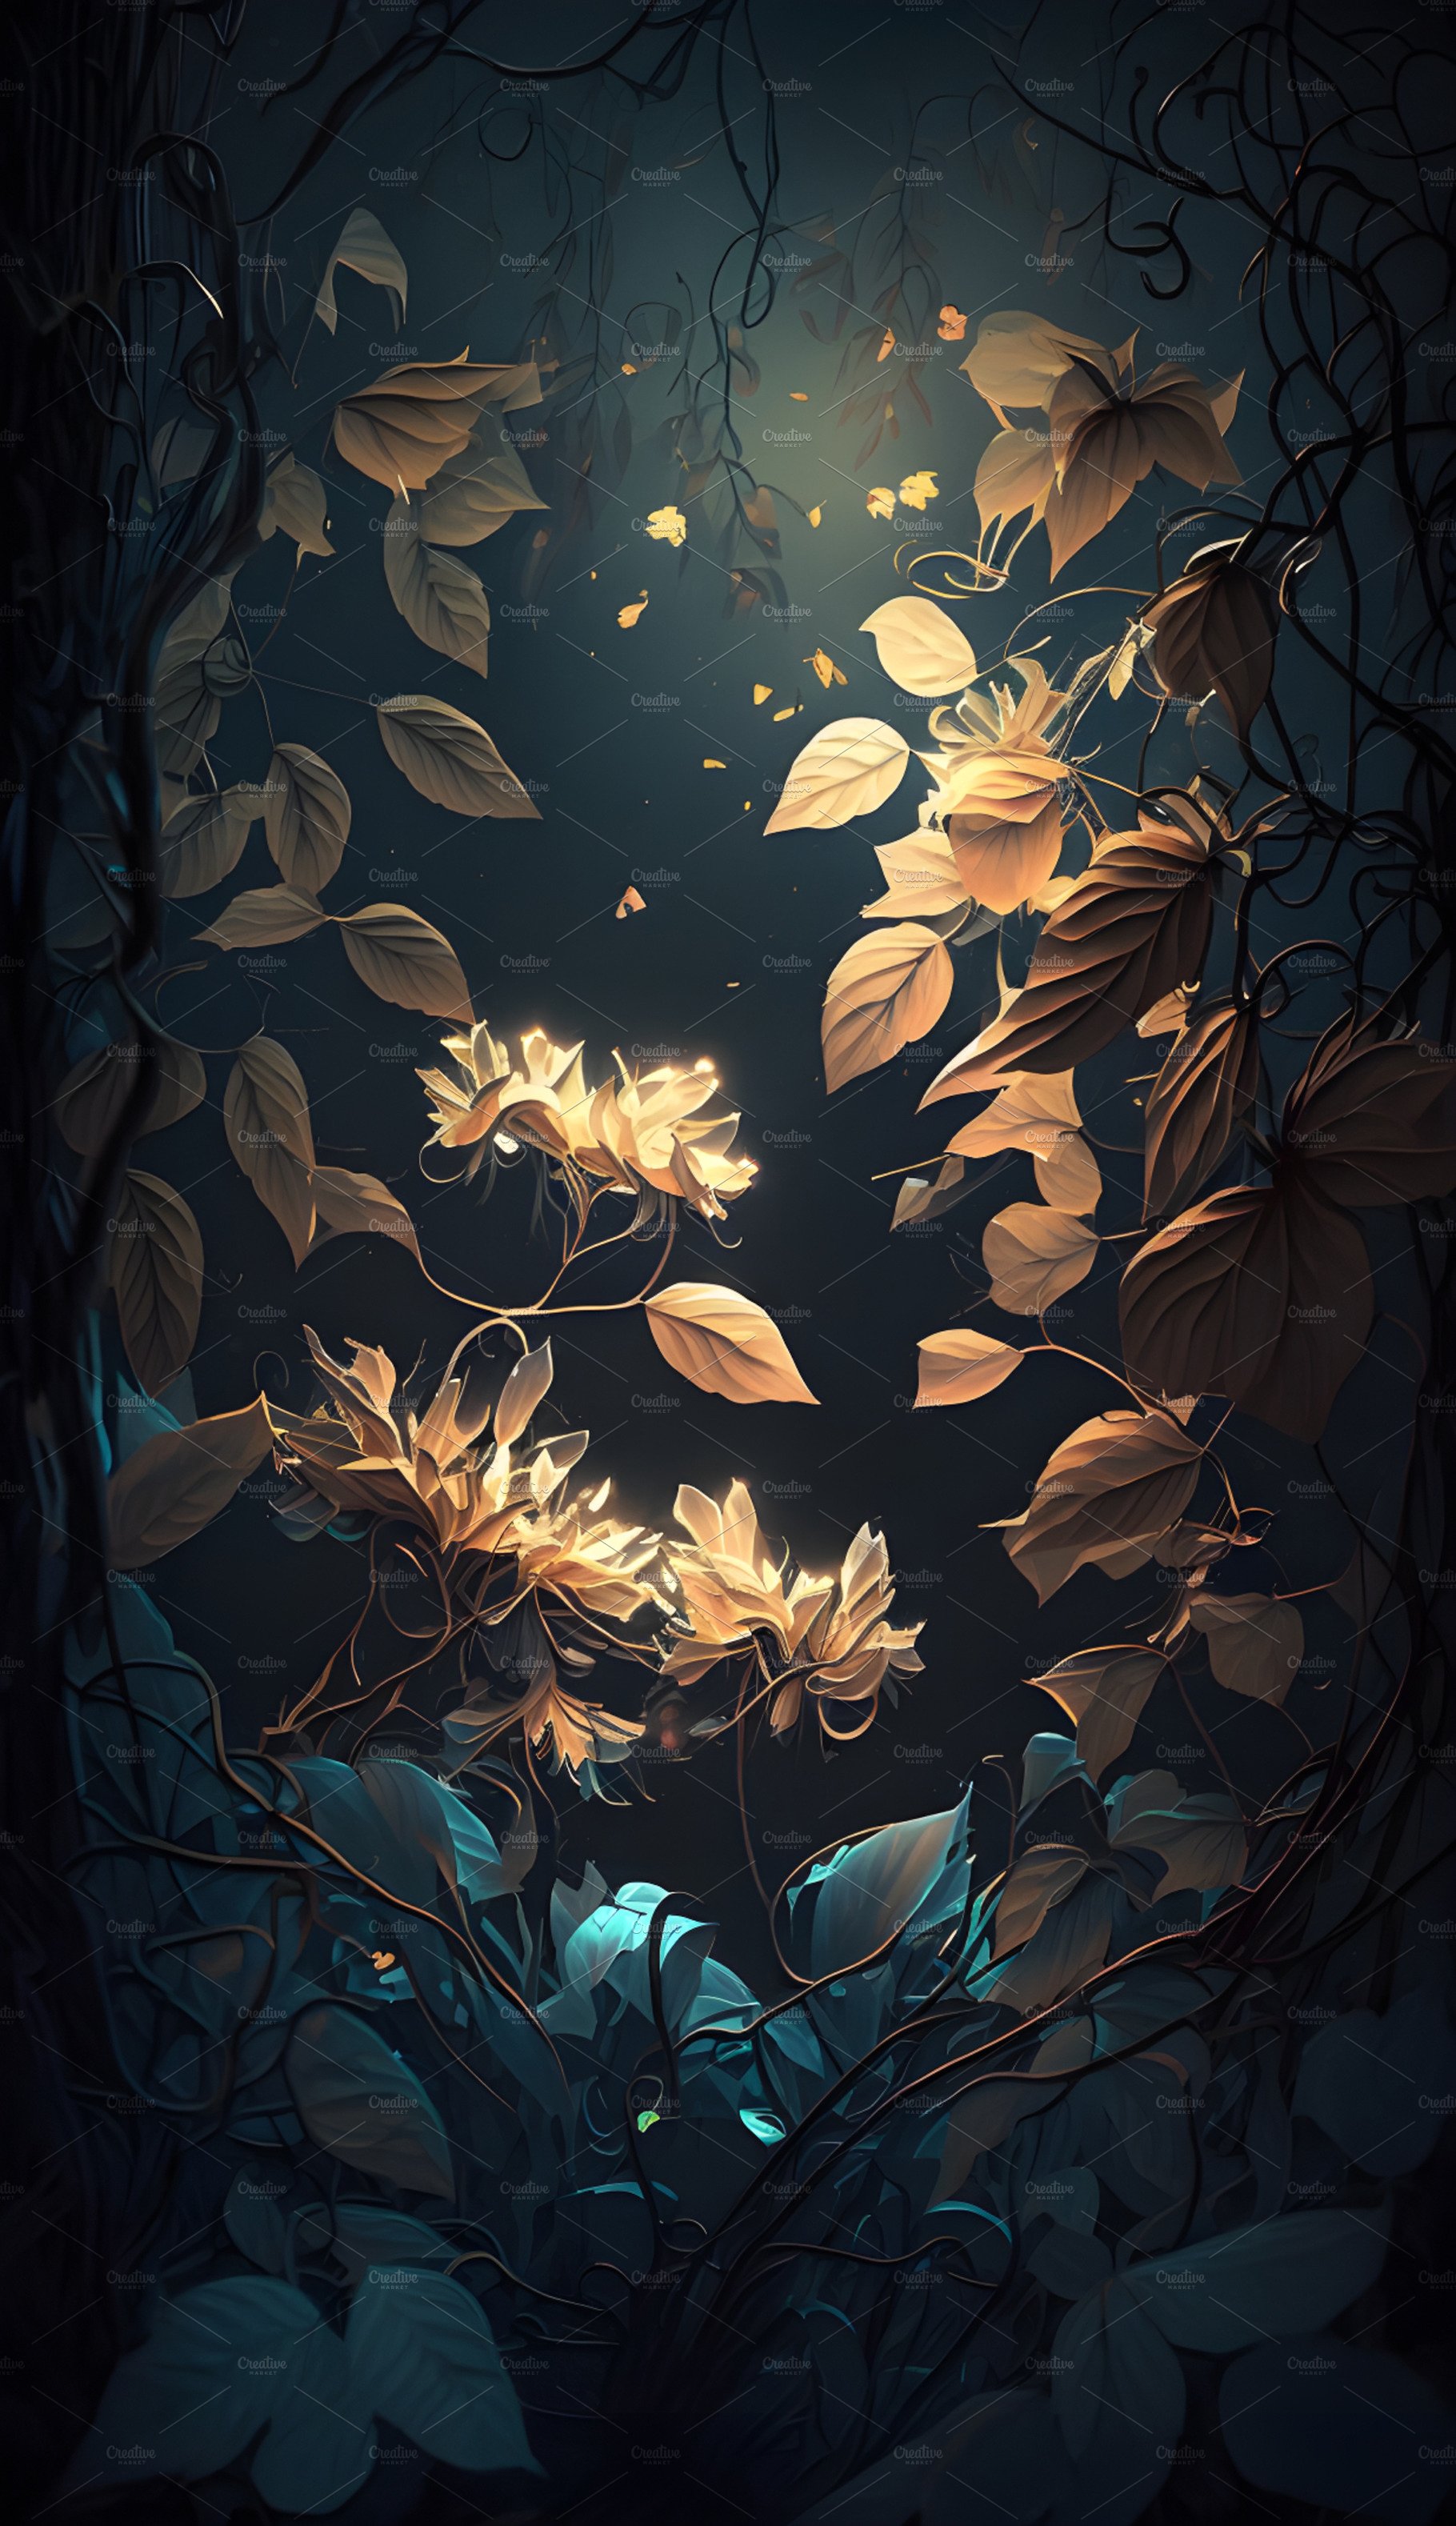 Magical iridescent flowers in dark mystery forest cover image.